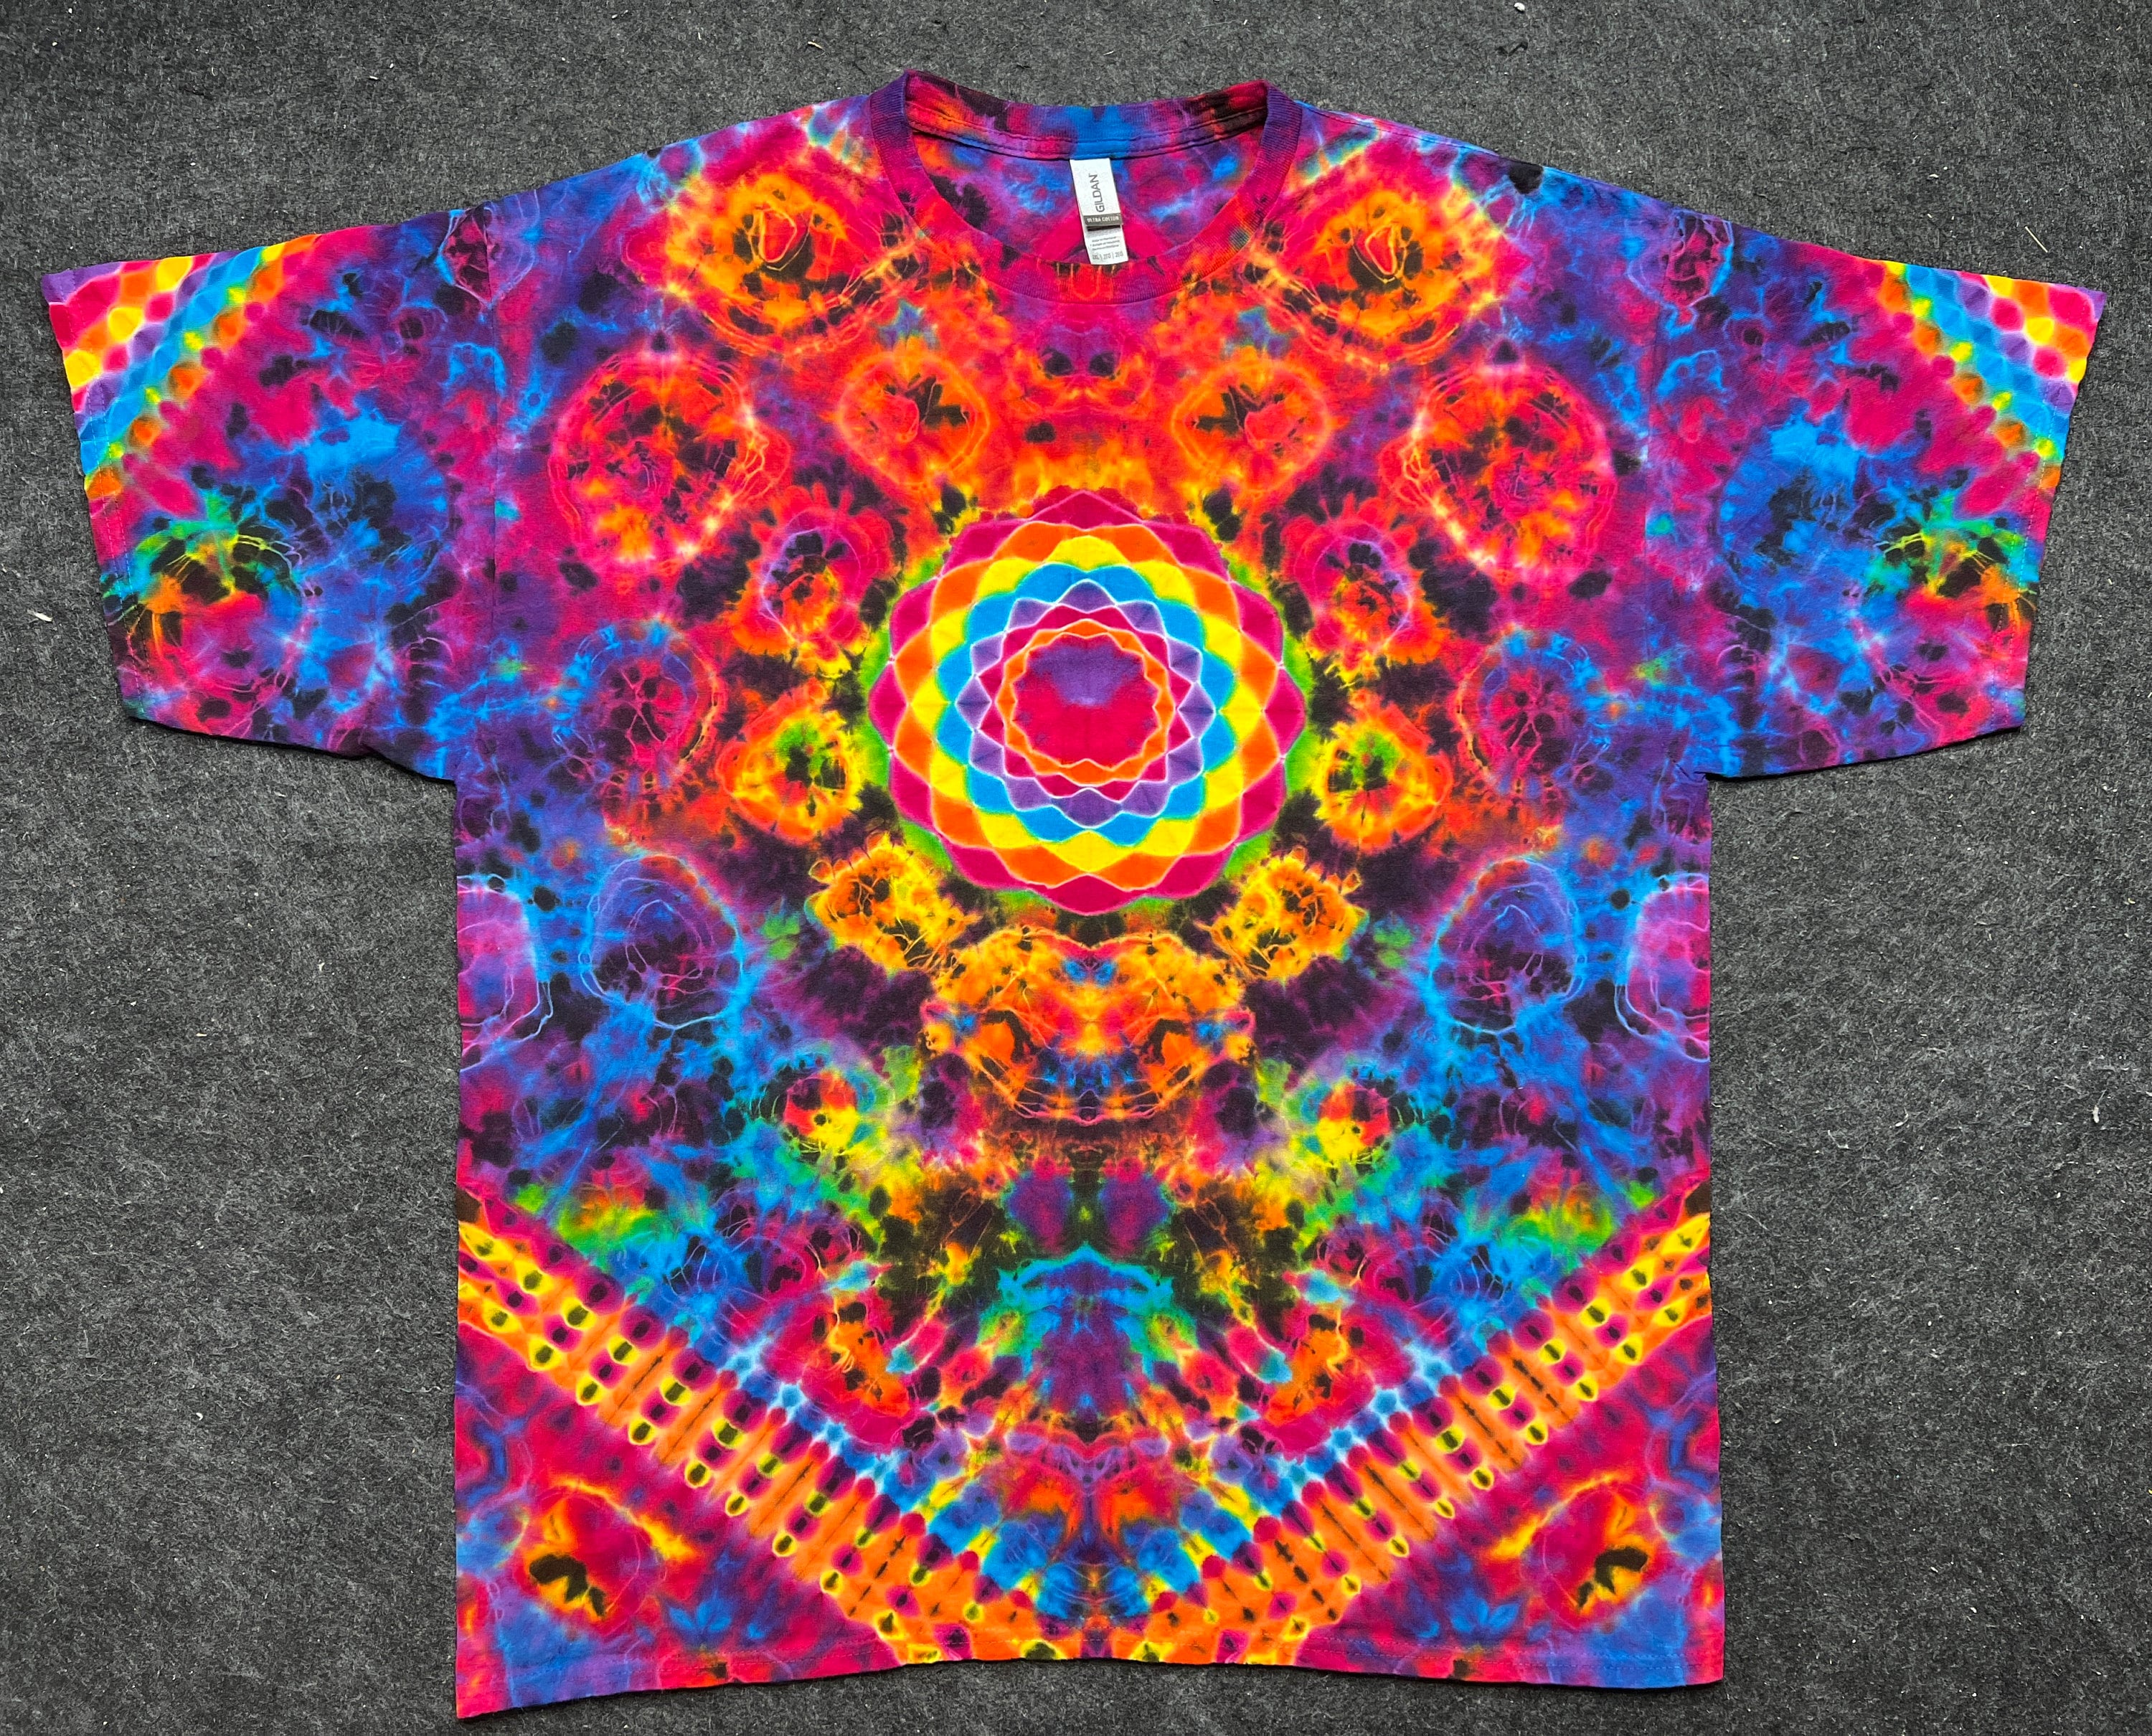  Hisayhe Trippy T-Shirt 3D Printed Psychedelic Tie Dye